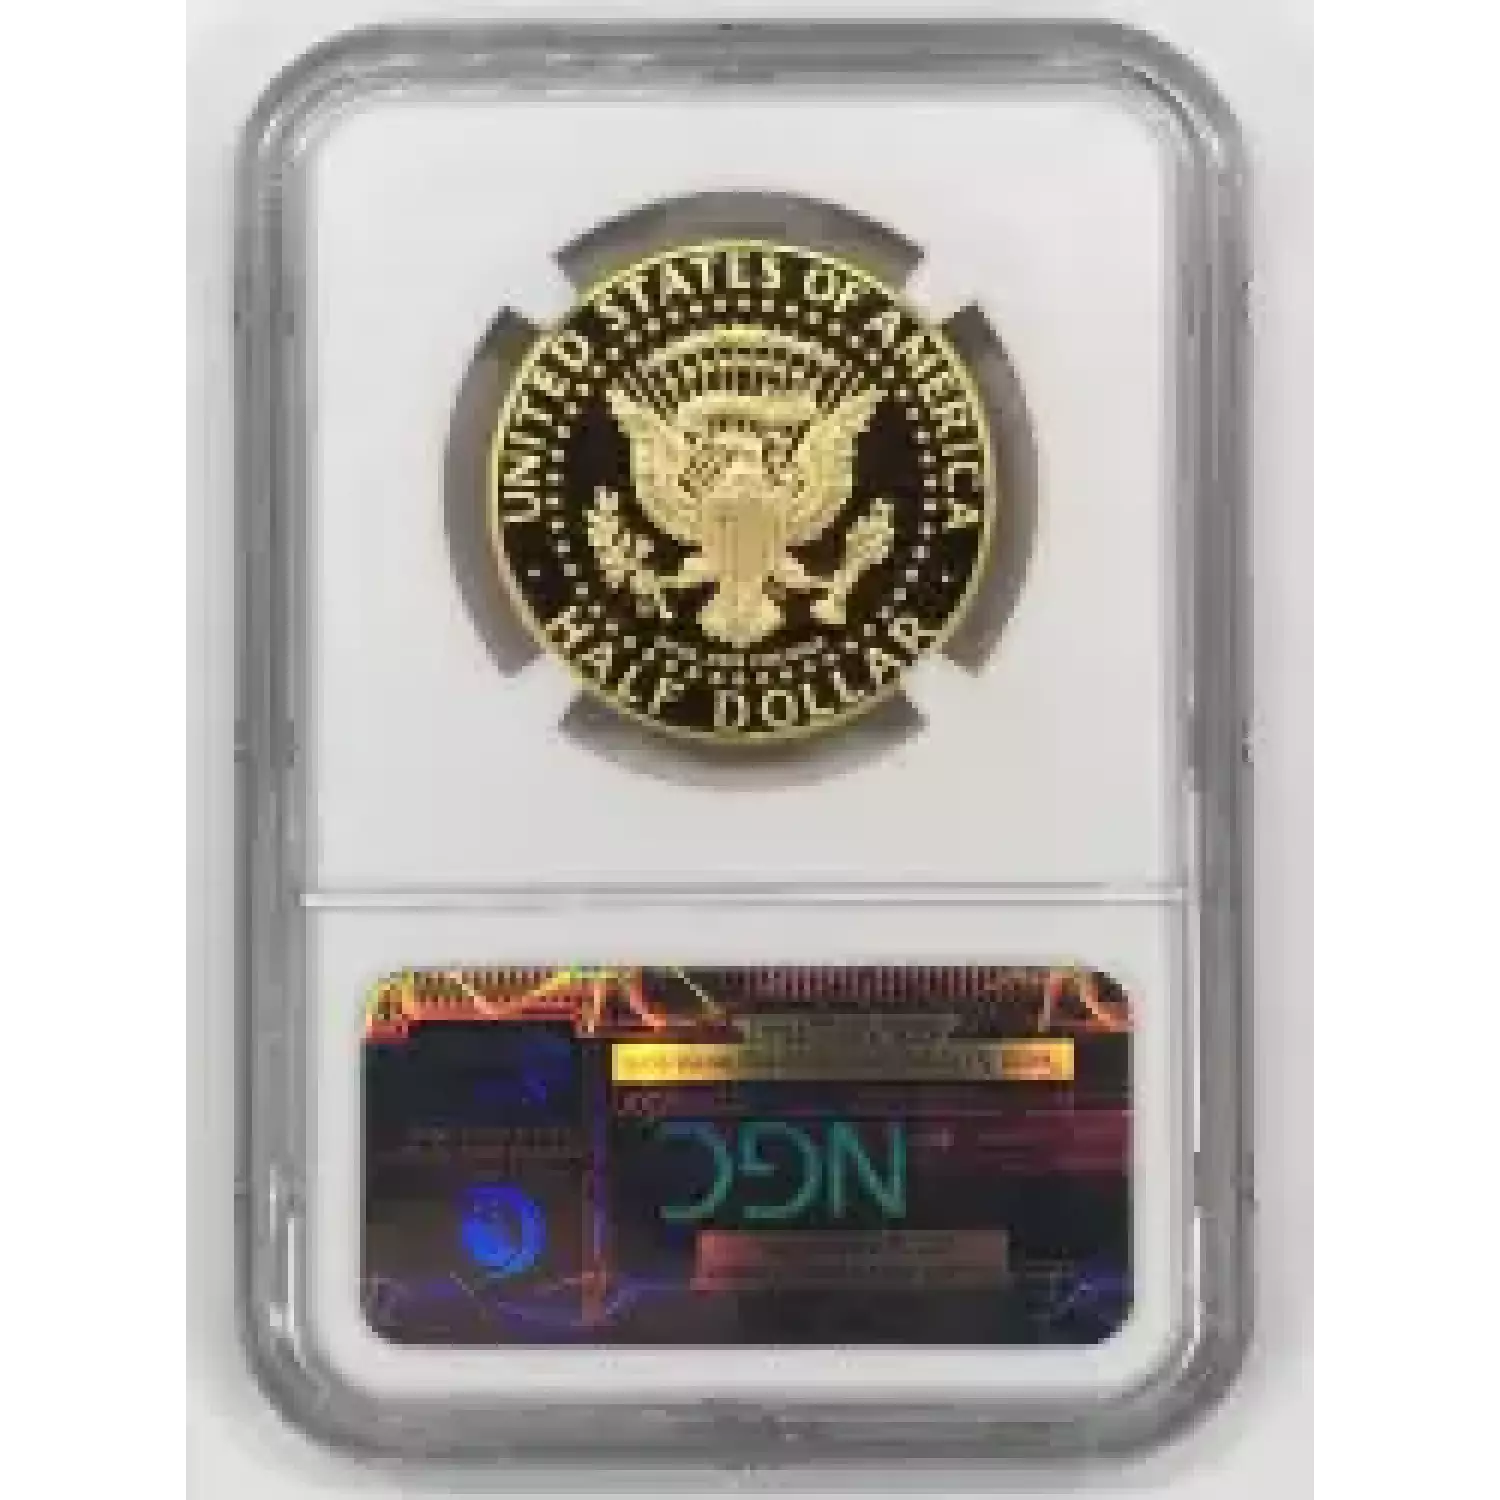 1964-2014 W HIGH RELIEF EARLY RELEASES KENNEDY 50th ANNIVERSARY ULTRA CAMEO